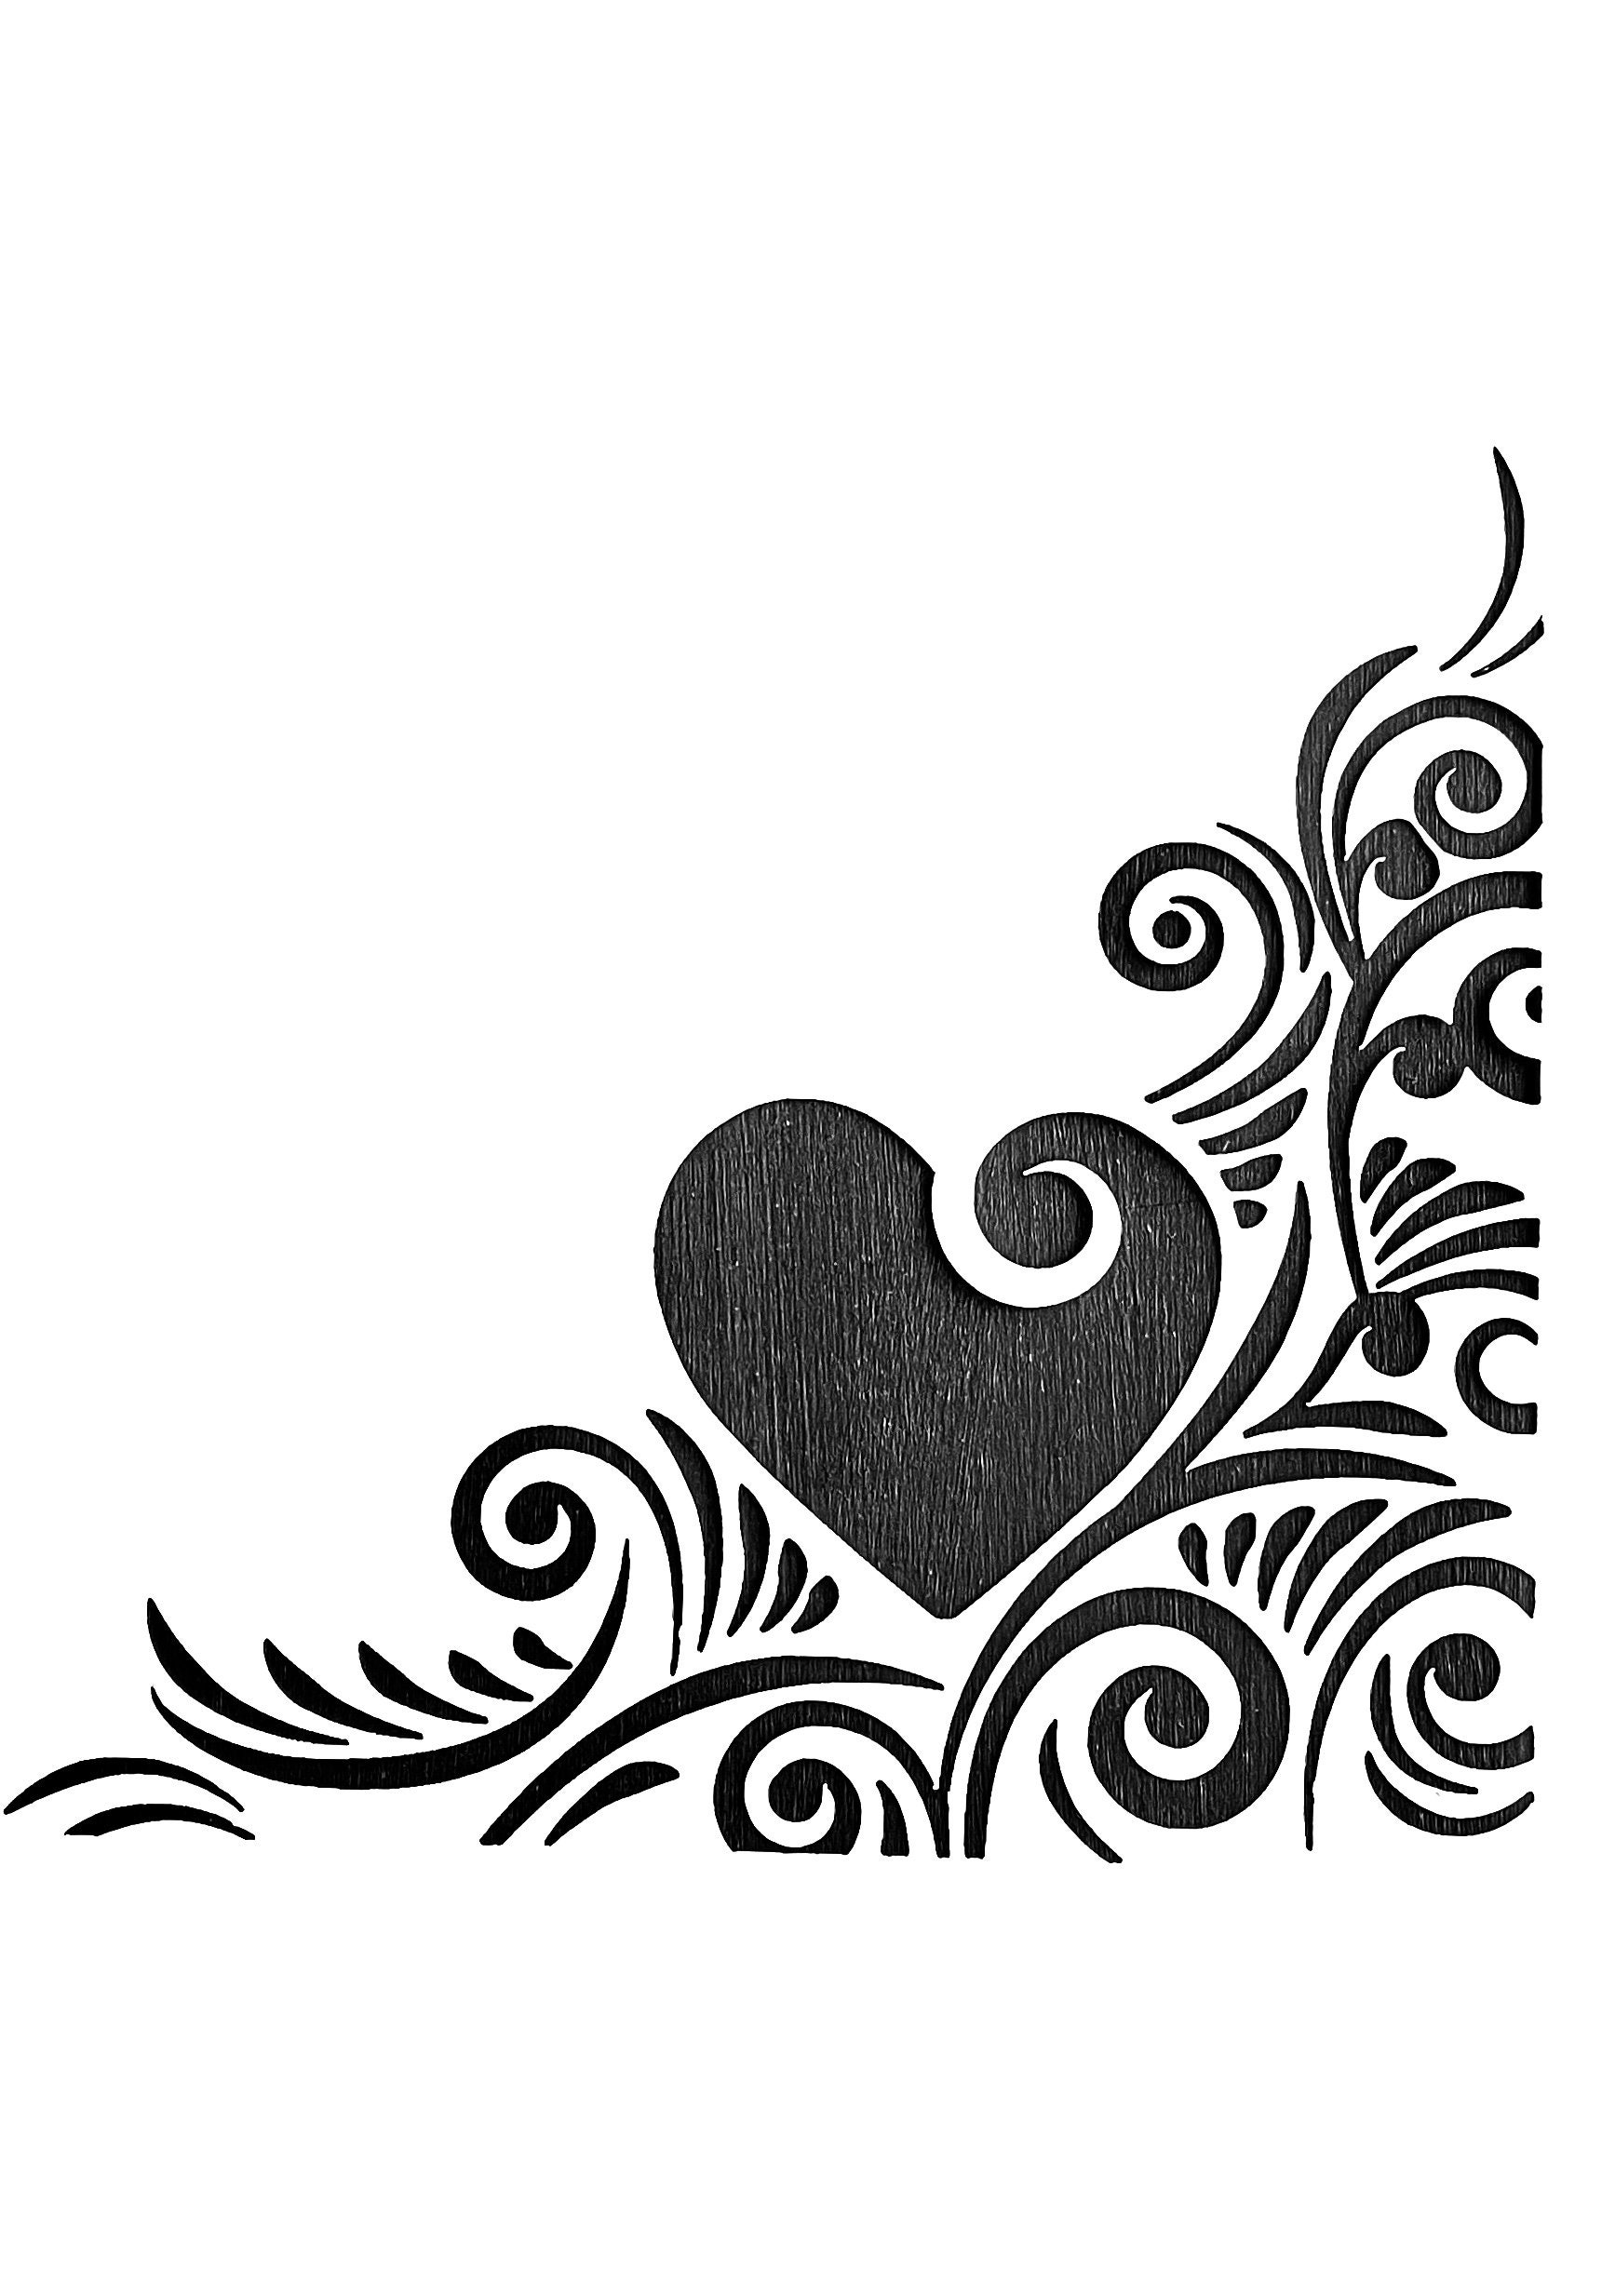 Glass etching stencil of Corner Design with a Heart. In category: Corners